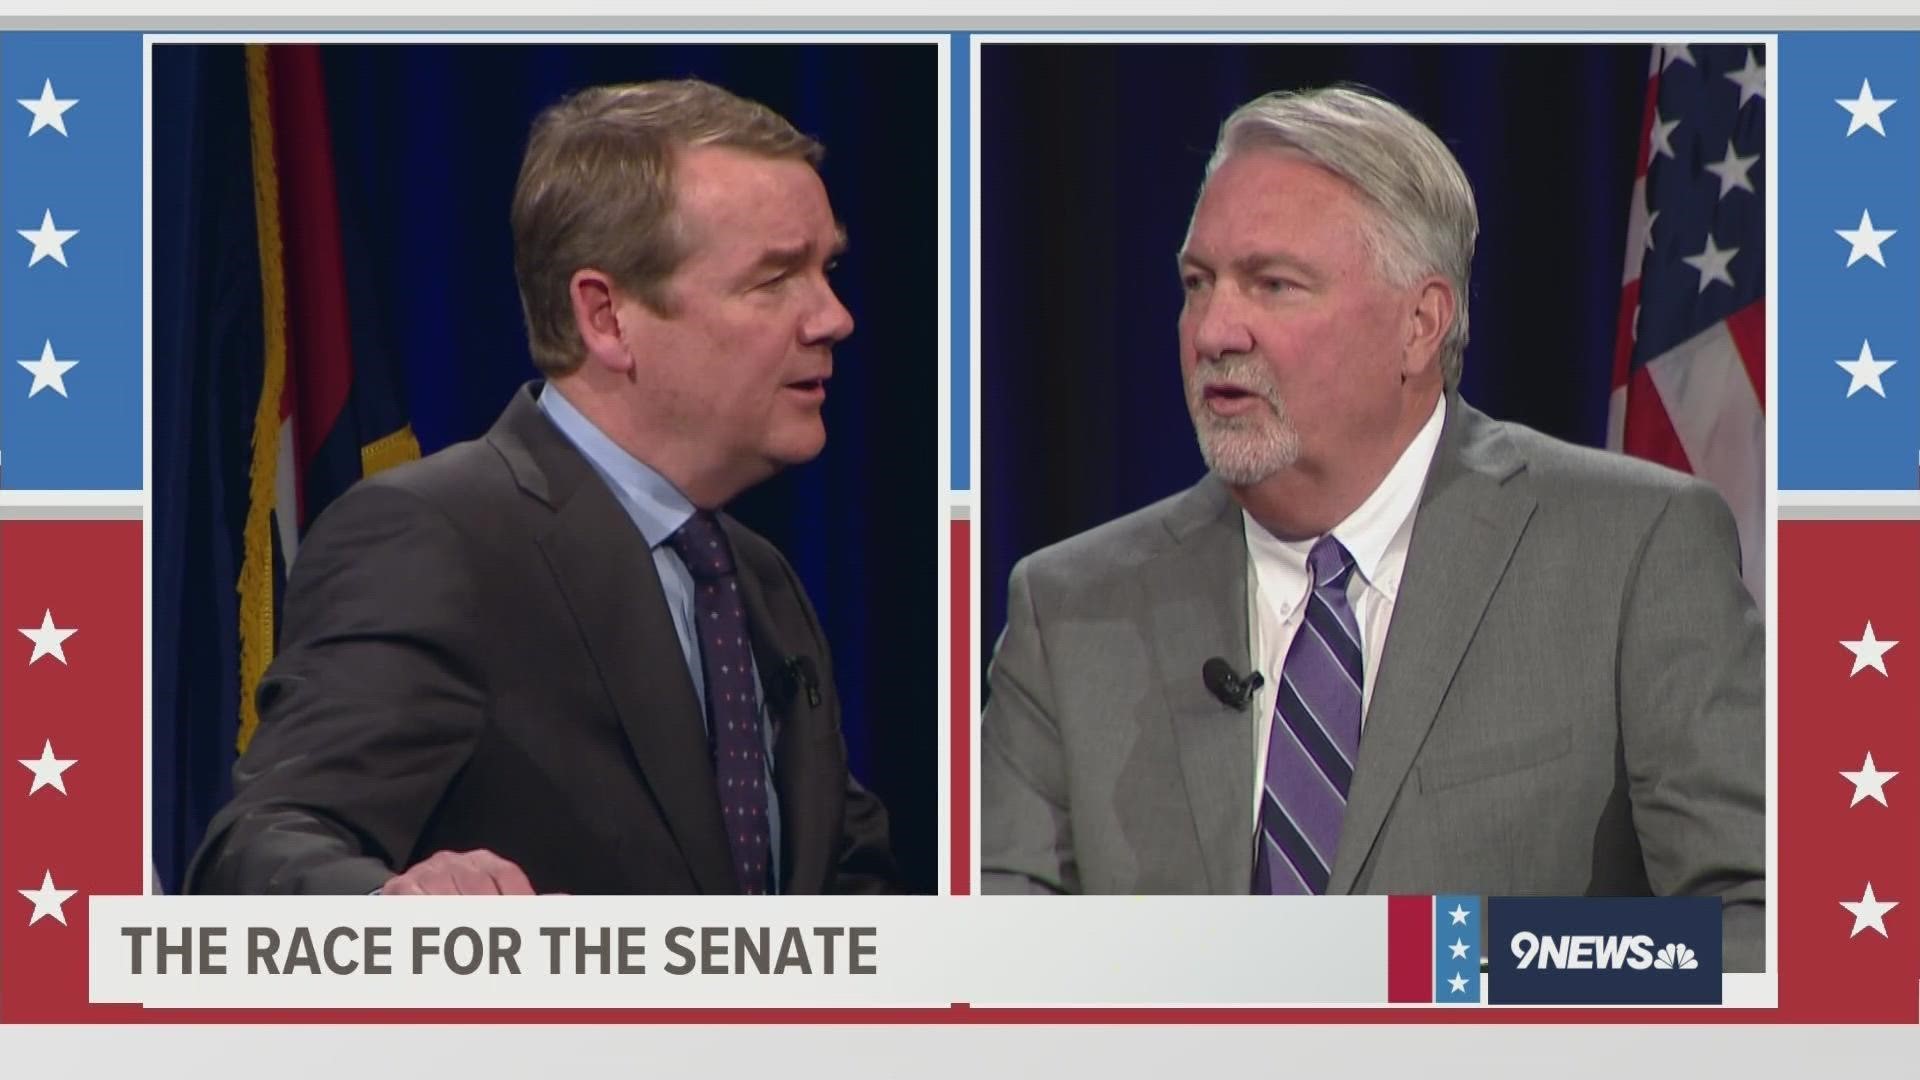 Incumbent Democratic Sen. Michael Bennet faces a challenge from Republican challenger and business owner Joe O'Dea for one of Colorado's Senate seats.